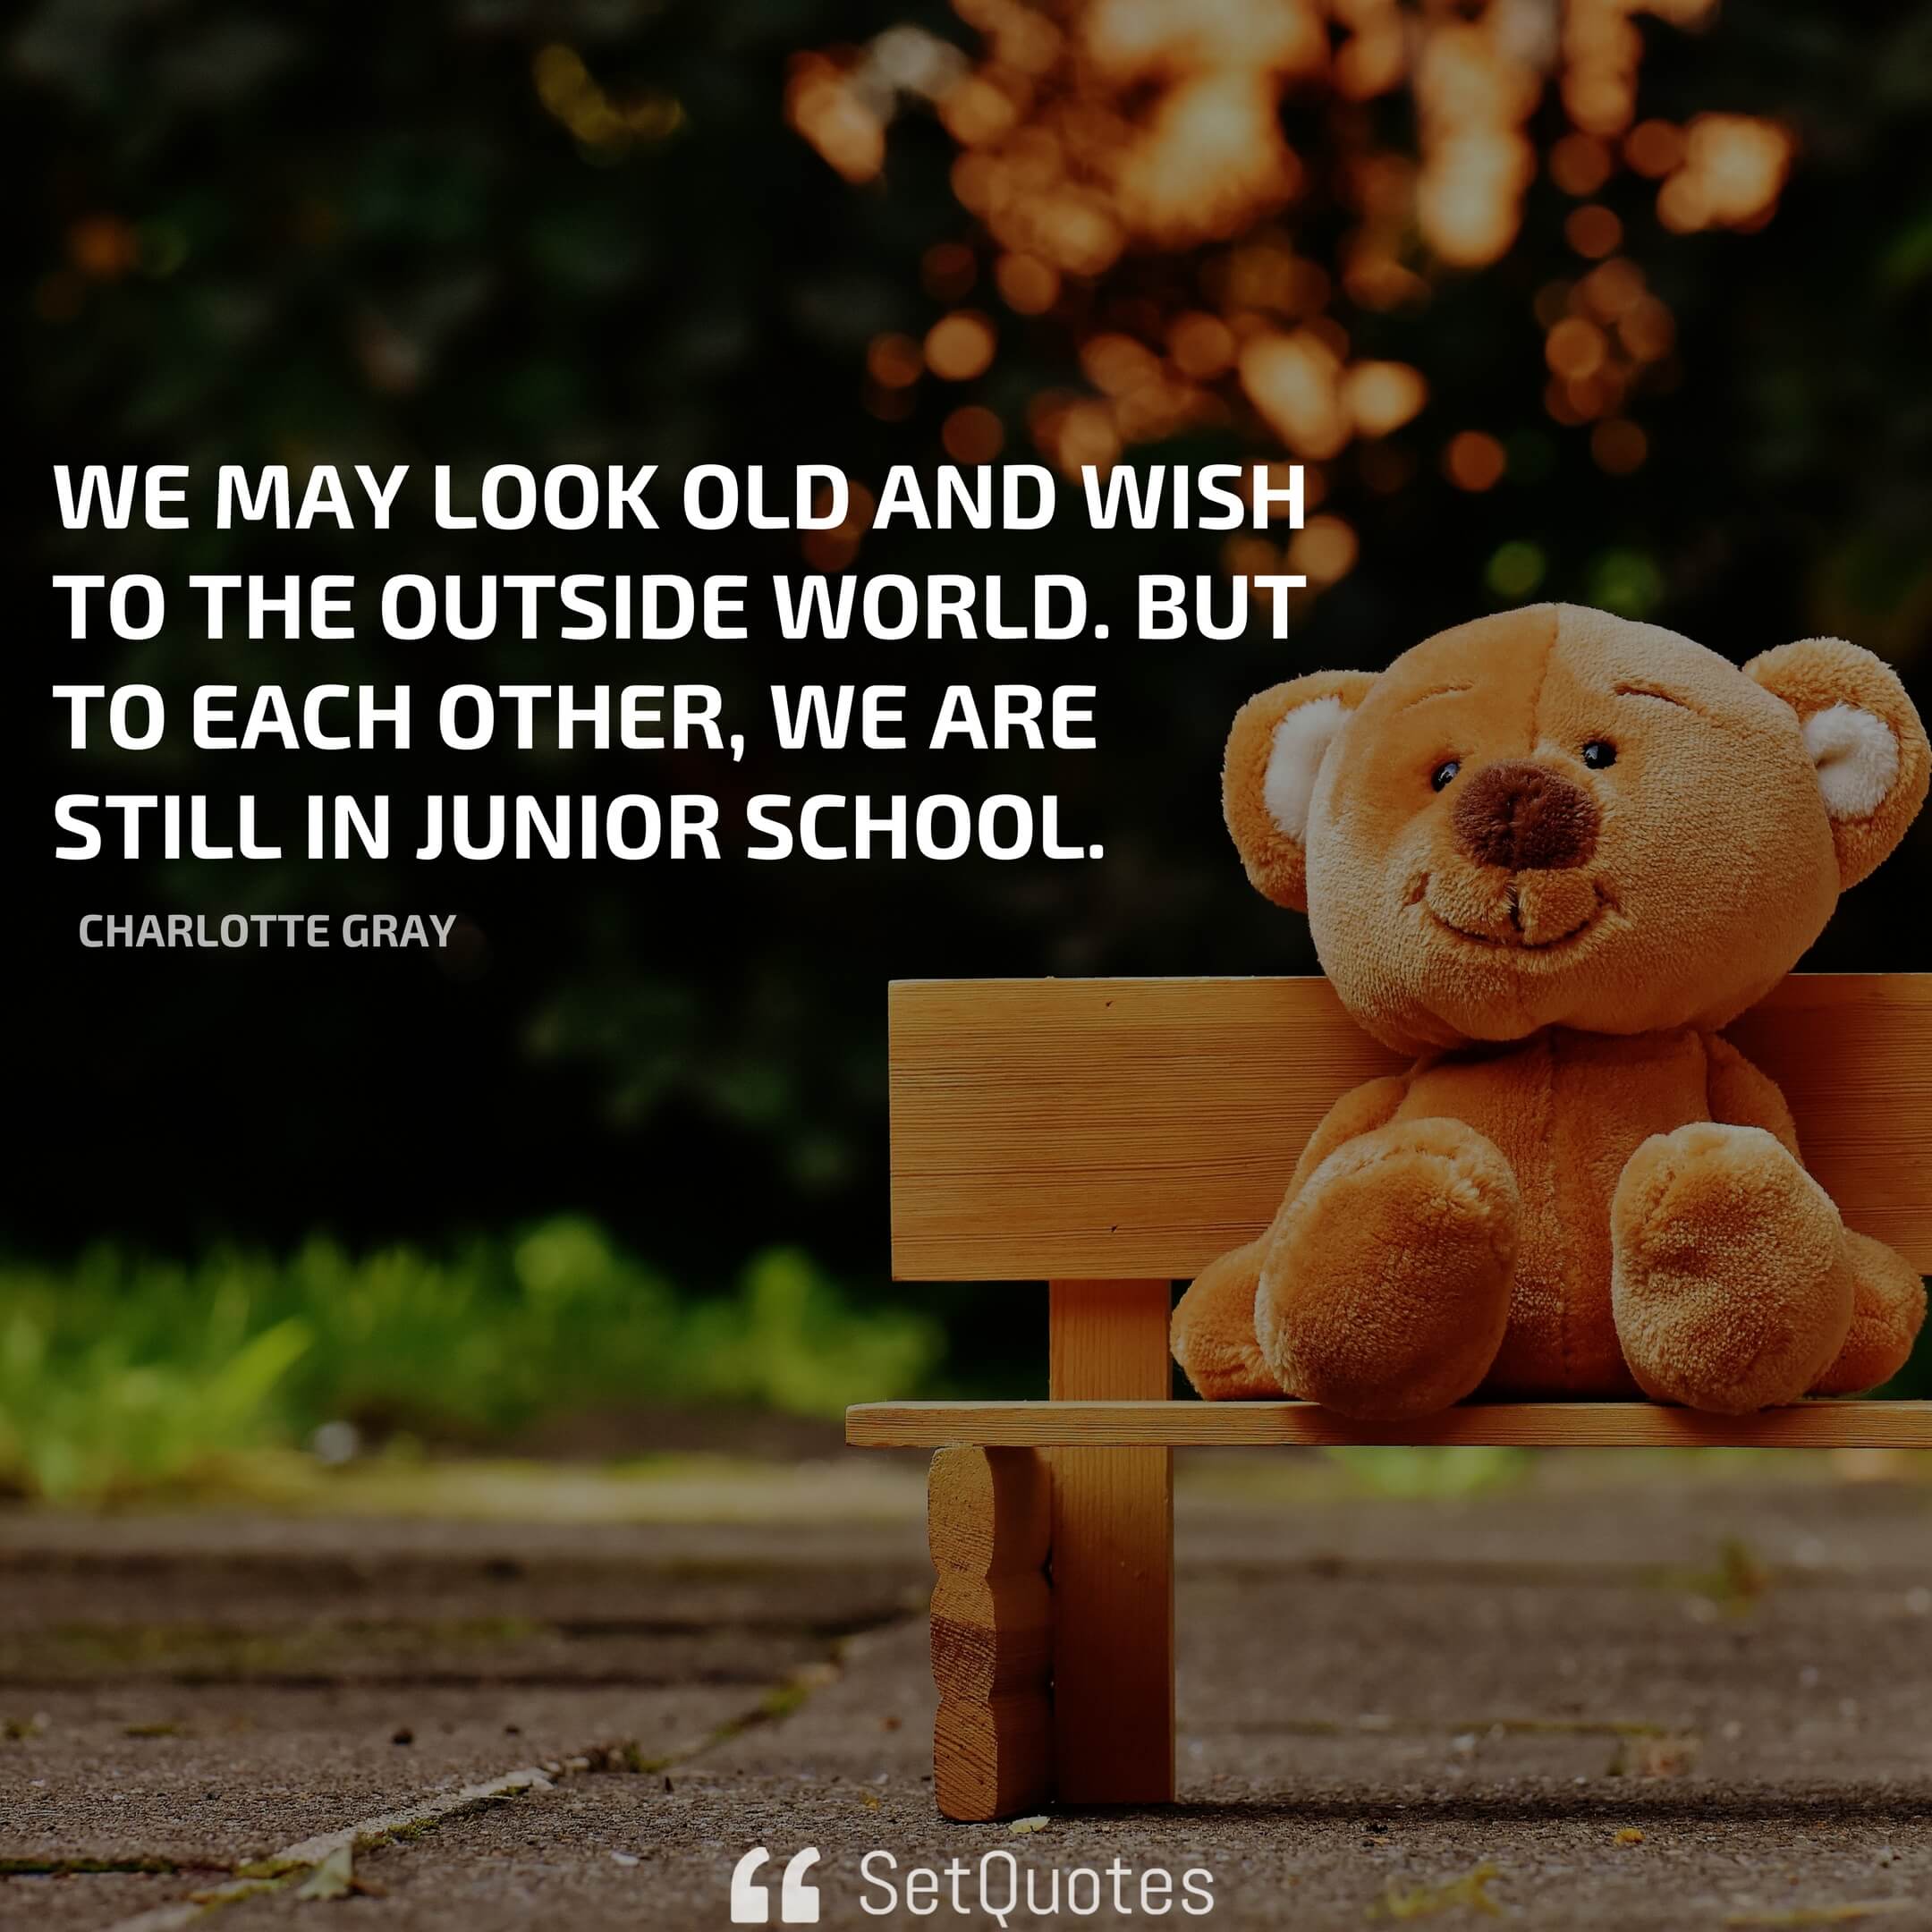 We may look old and wish to the outside world. but to each other, we are still in junior school. - Charlotte Gray